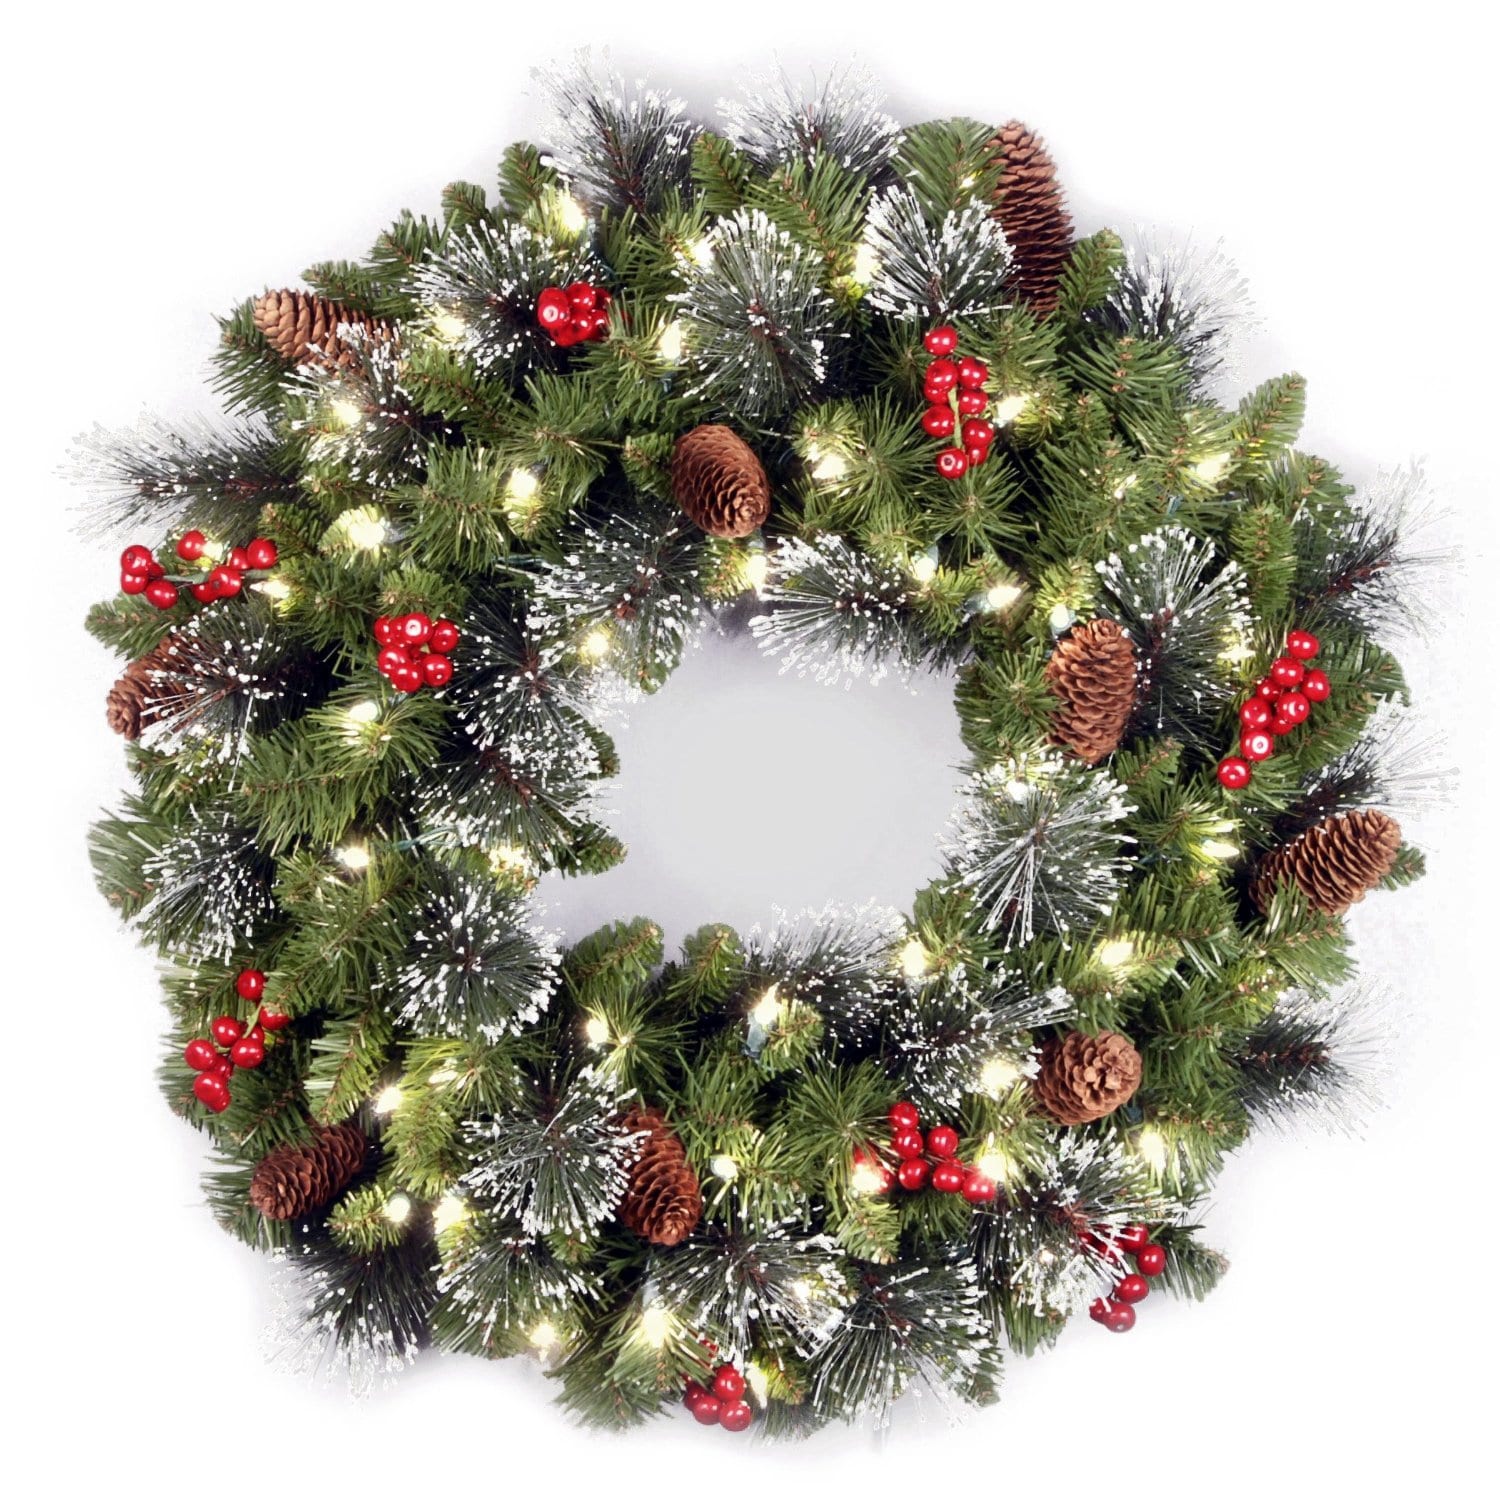 Best Christmas Wreaths 2016: National Tree 24 inch